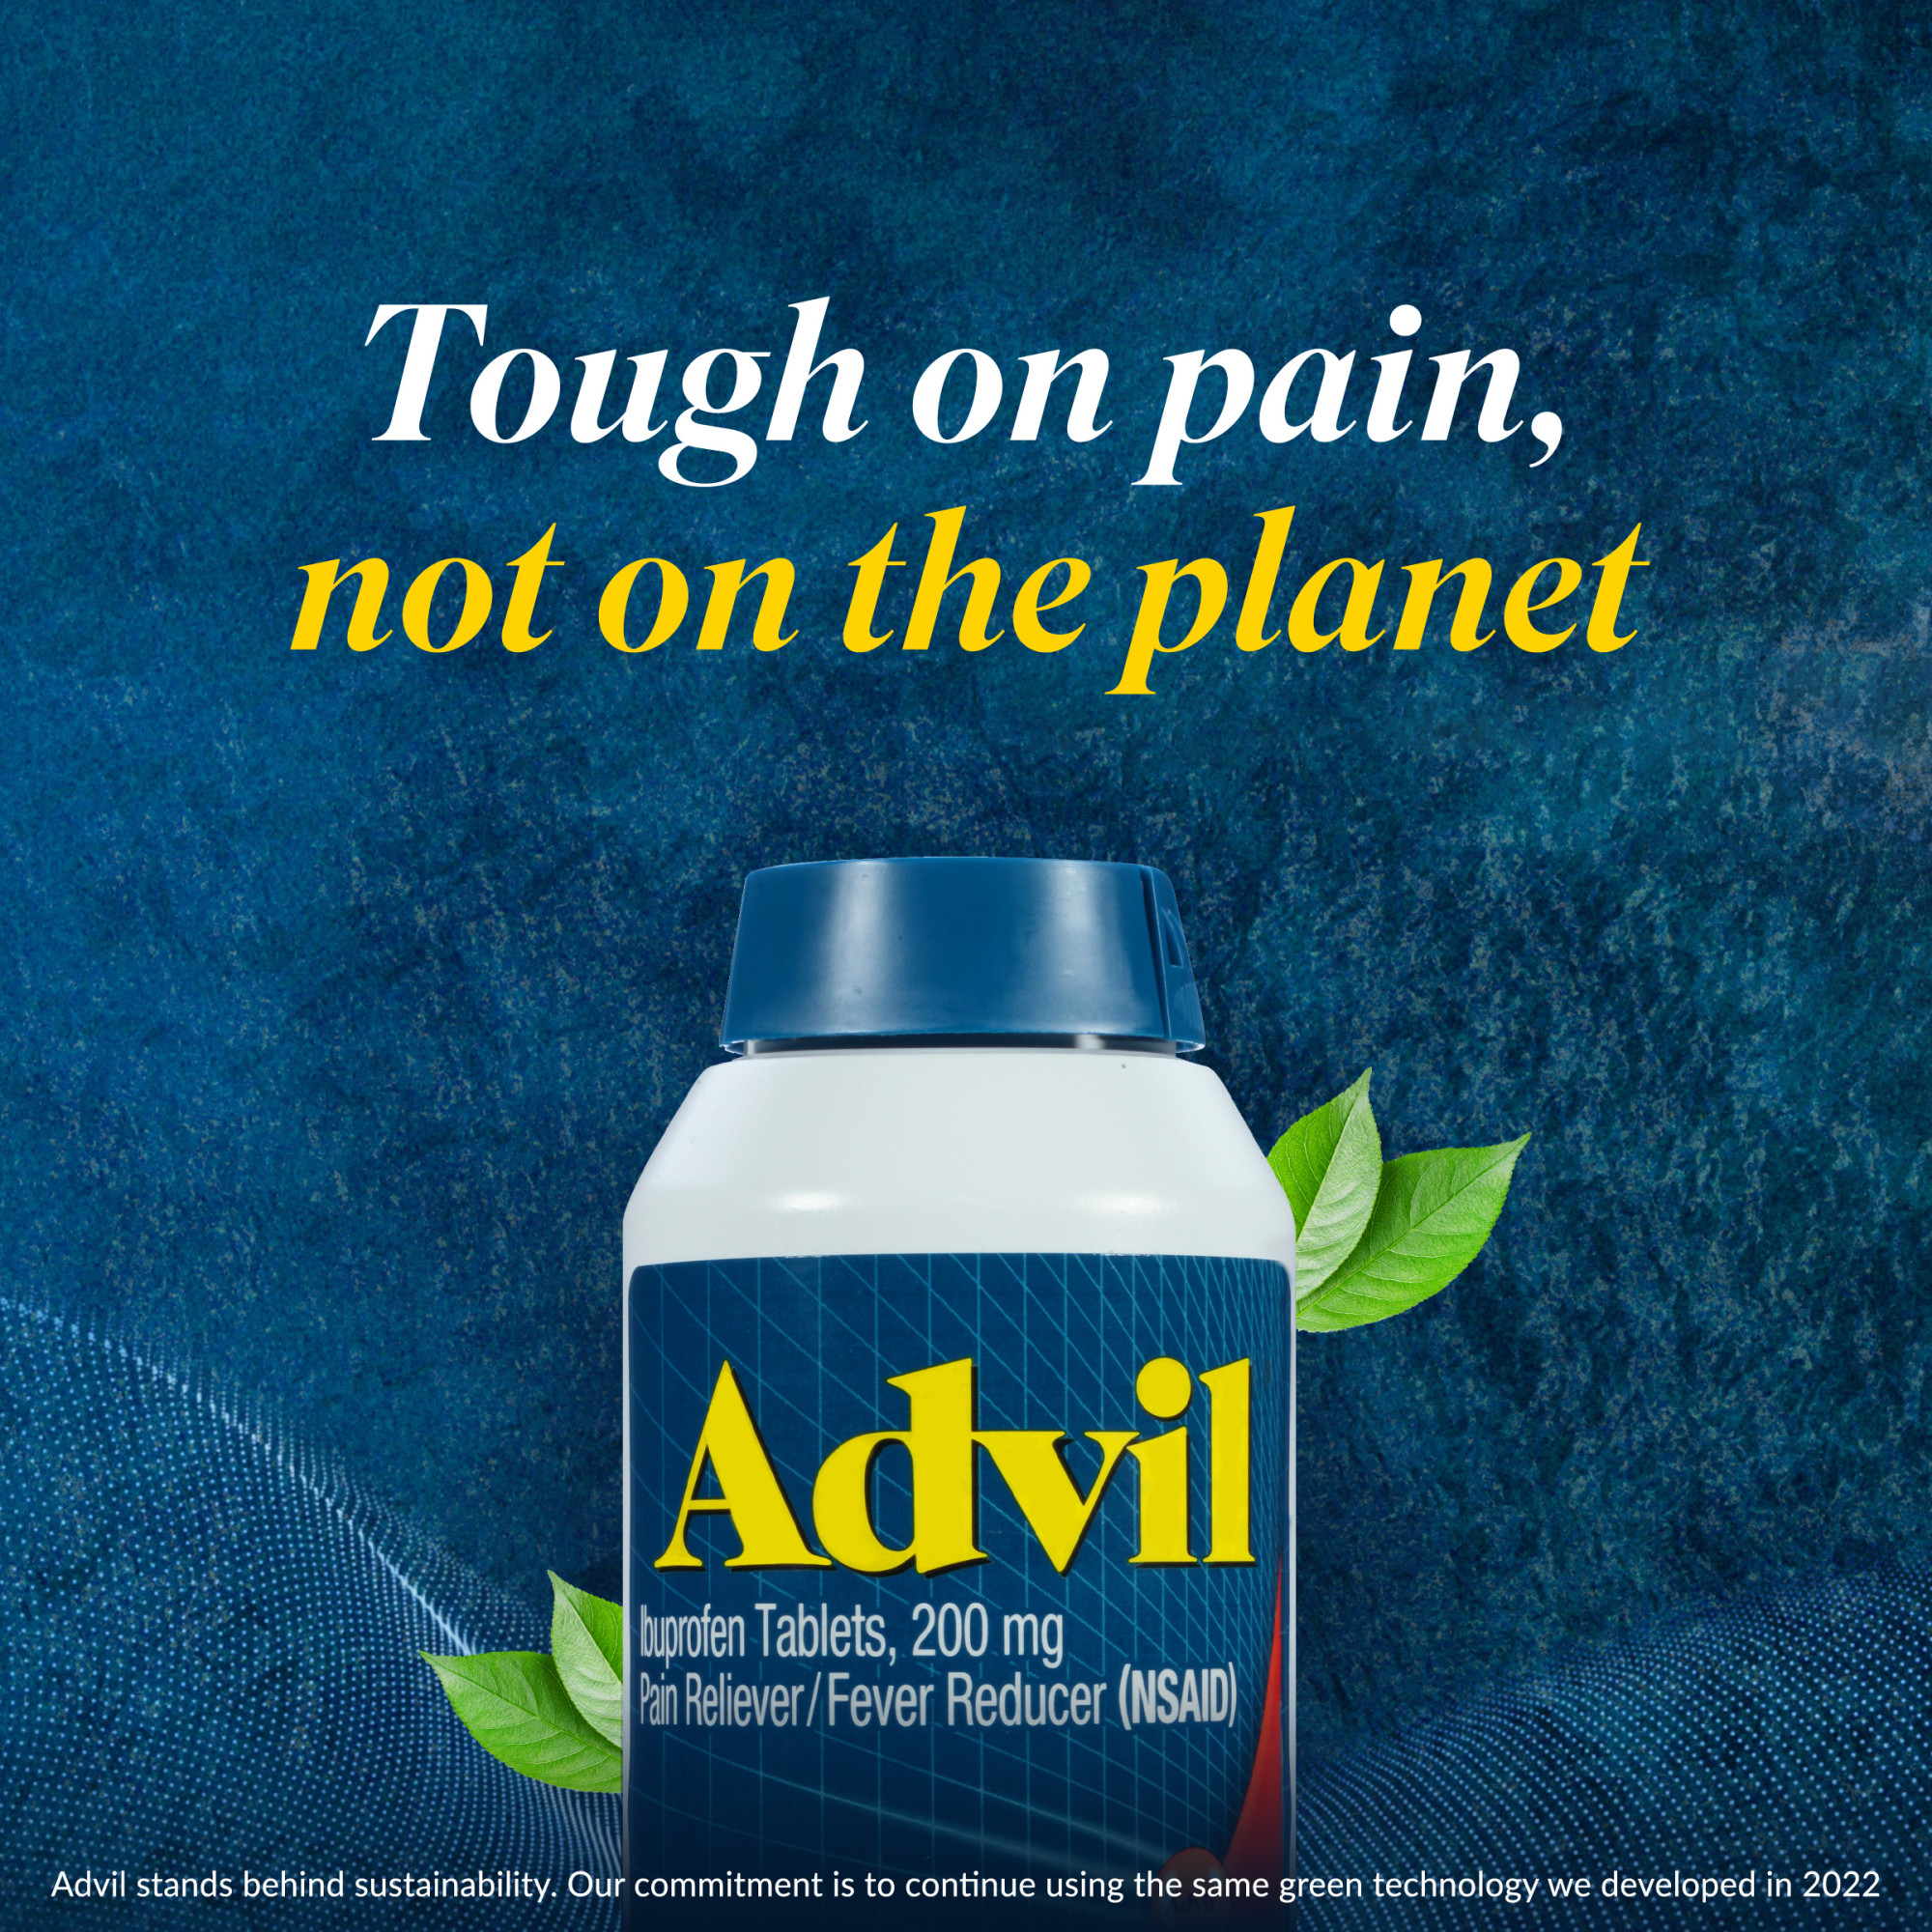 Advil Pain Relievers and Fever Reducer Coated Tablets, 200Mg Ibuprofen, 300 Count - image 5 of 7